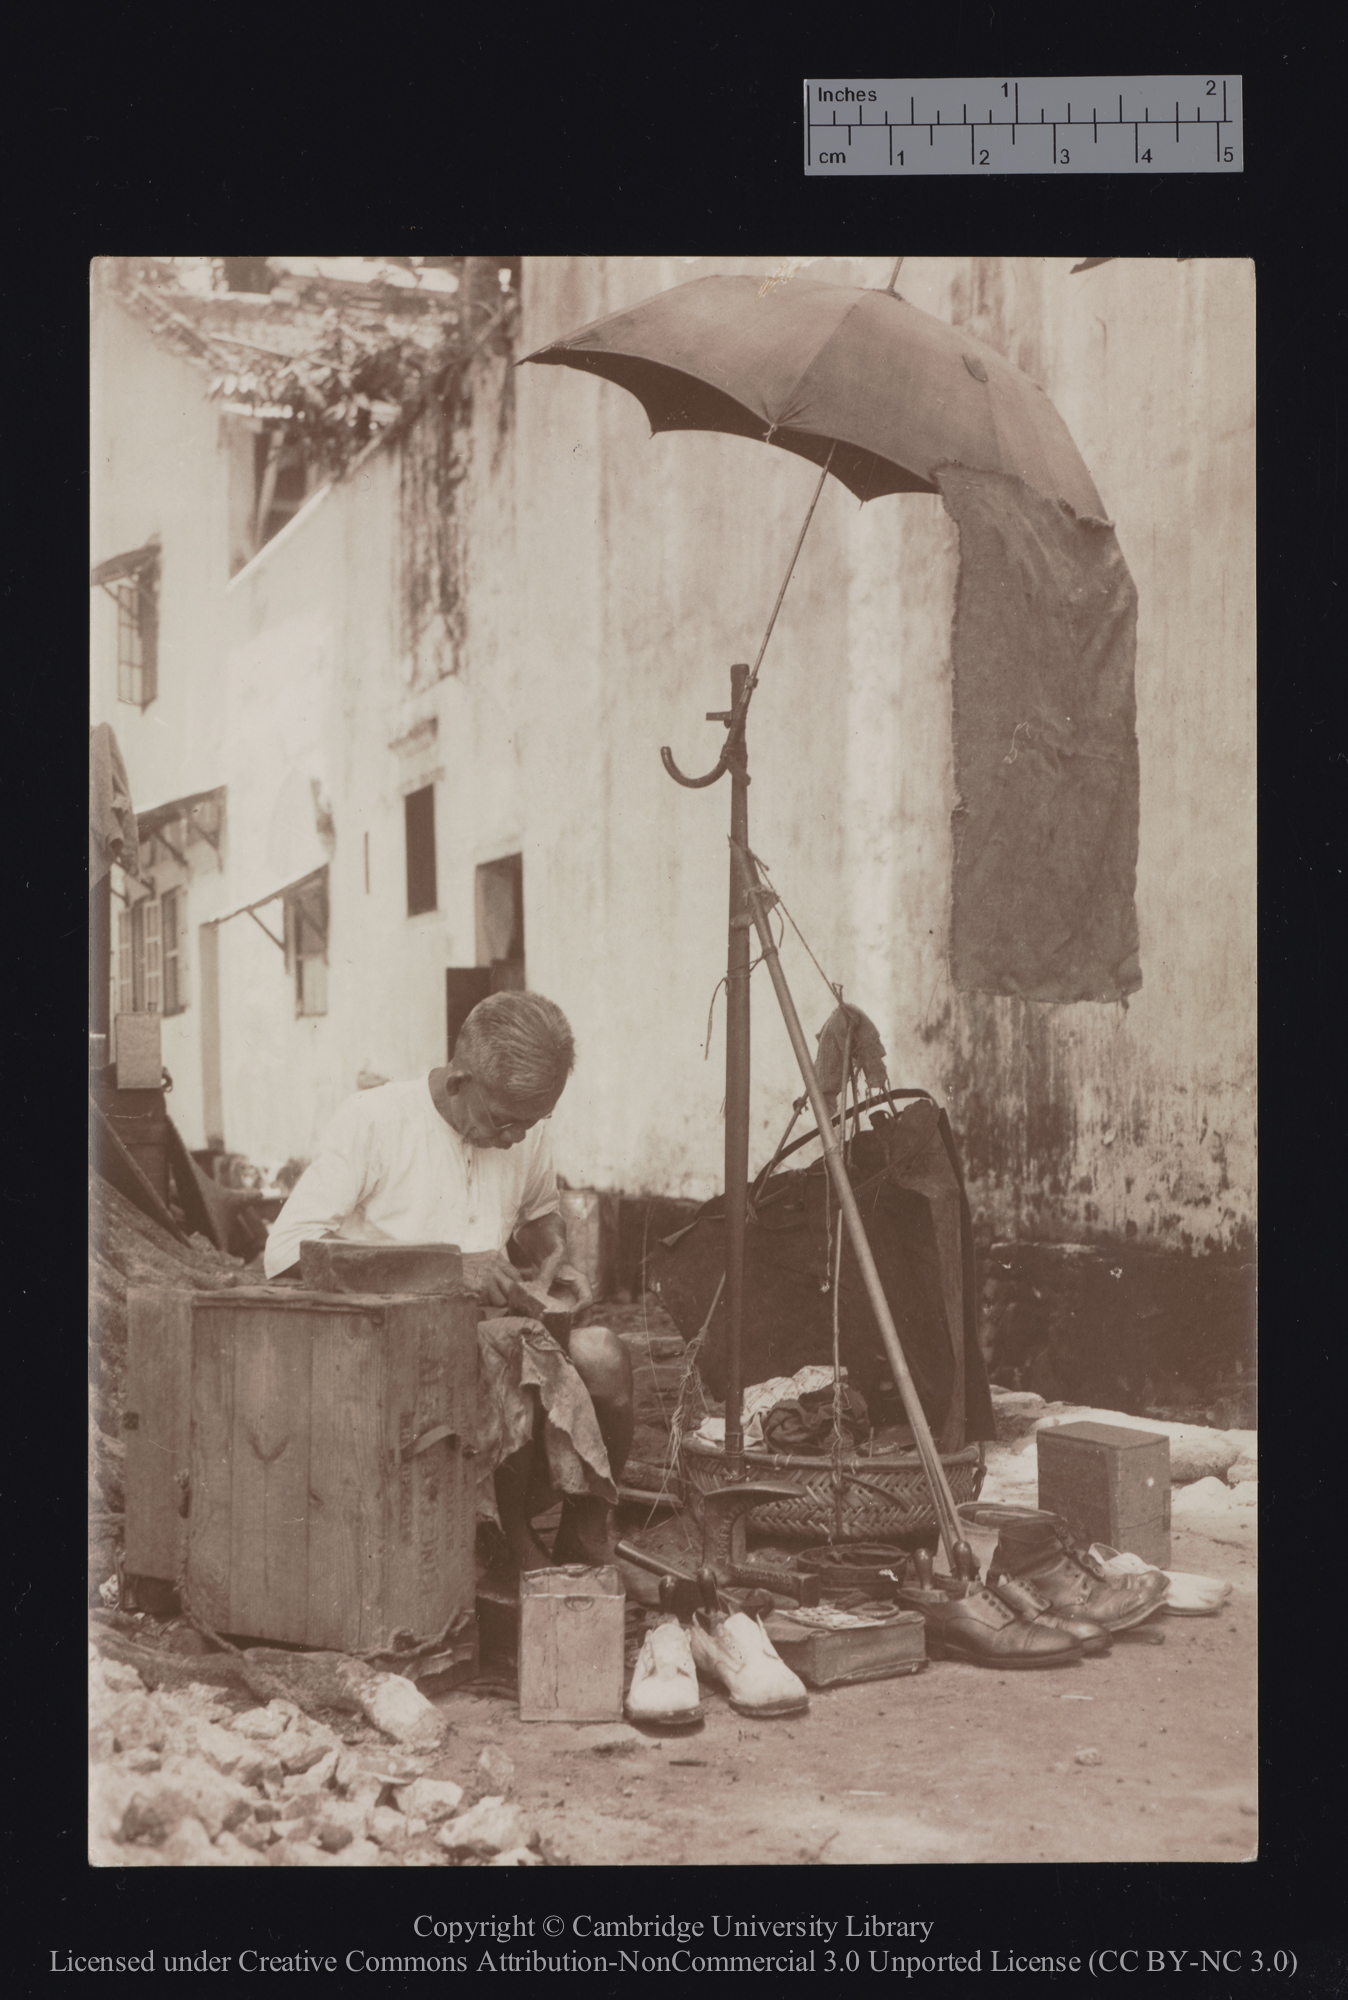 The cobbler, of an ? Ipoh back lane, 1910 - 1929